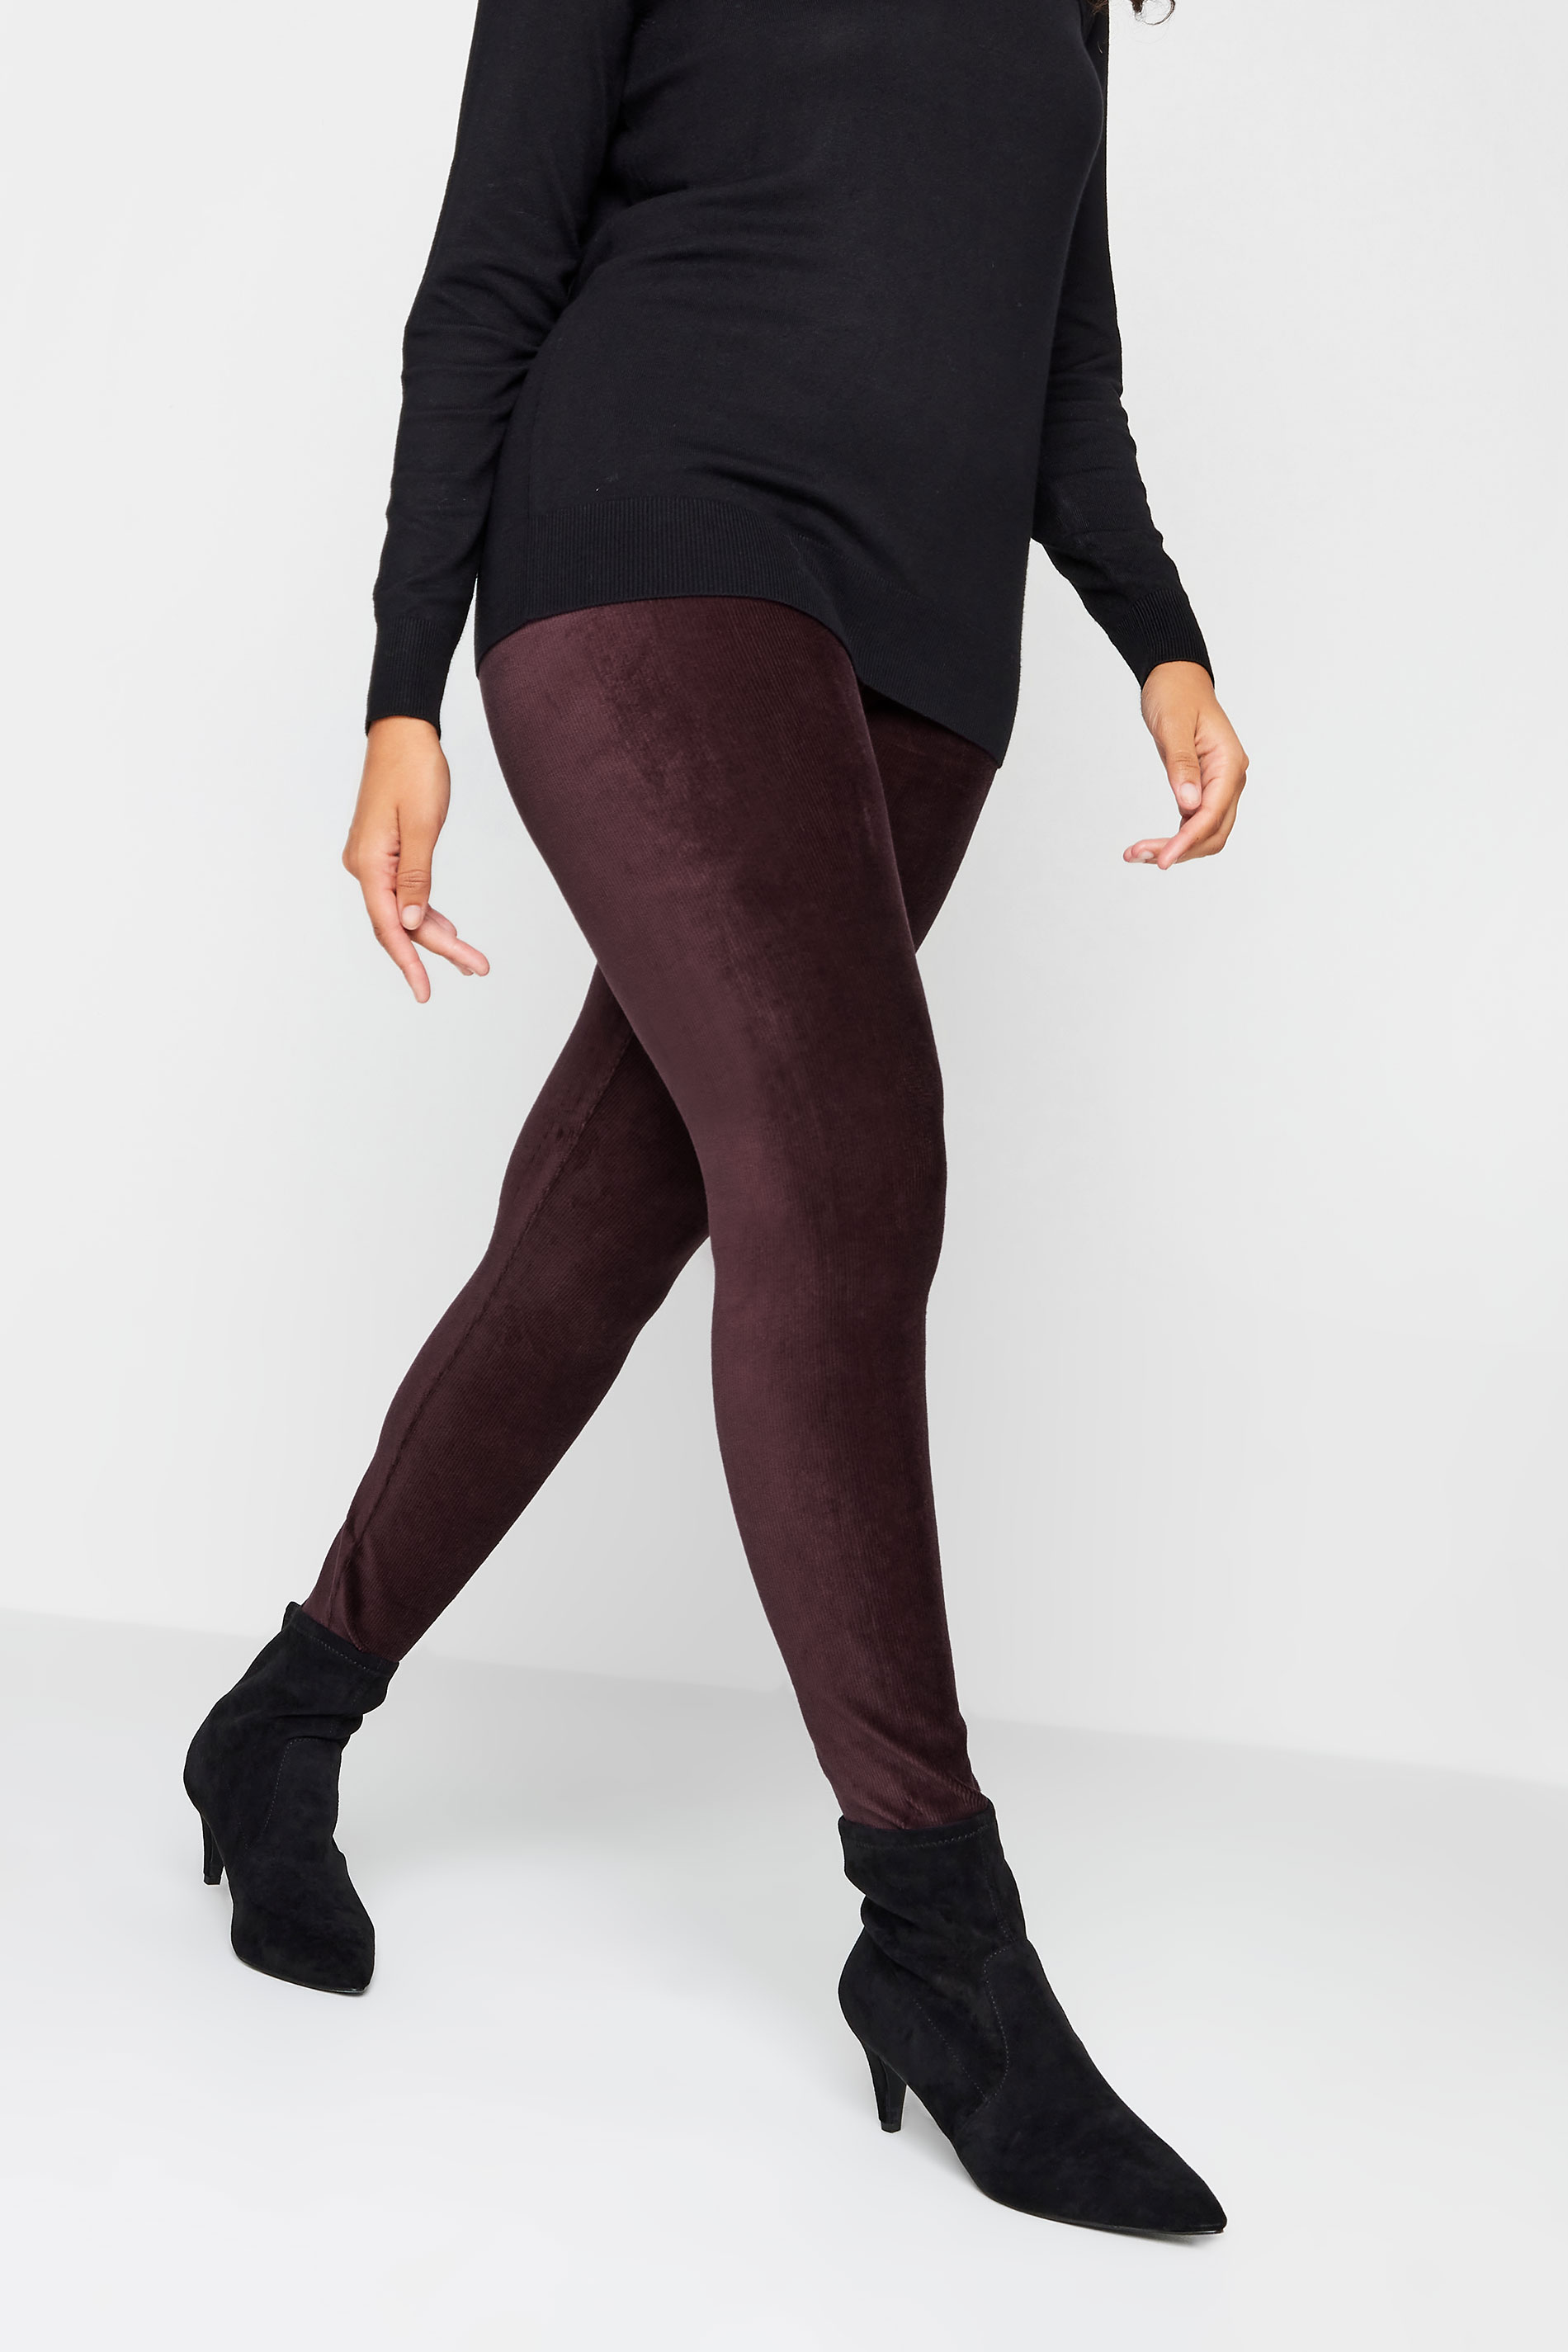 M&Co Berry Red Cord Stretch Leggings